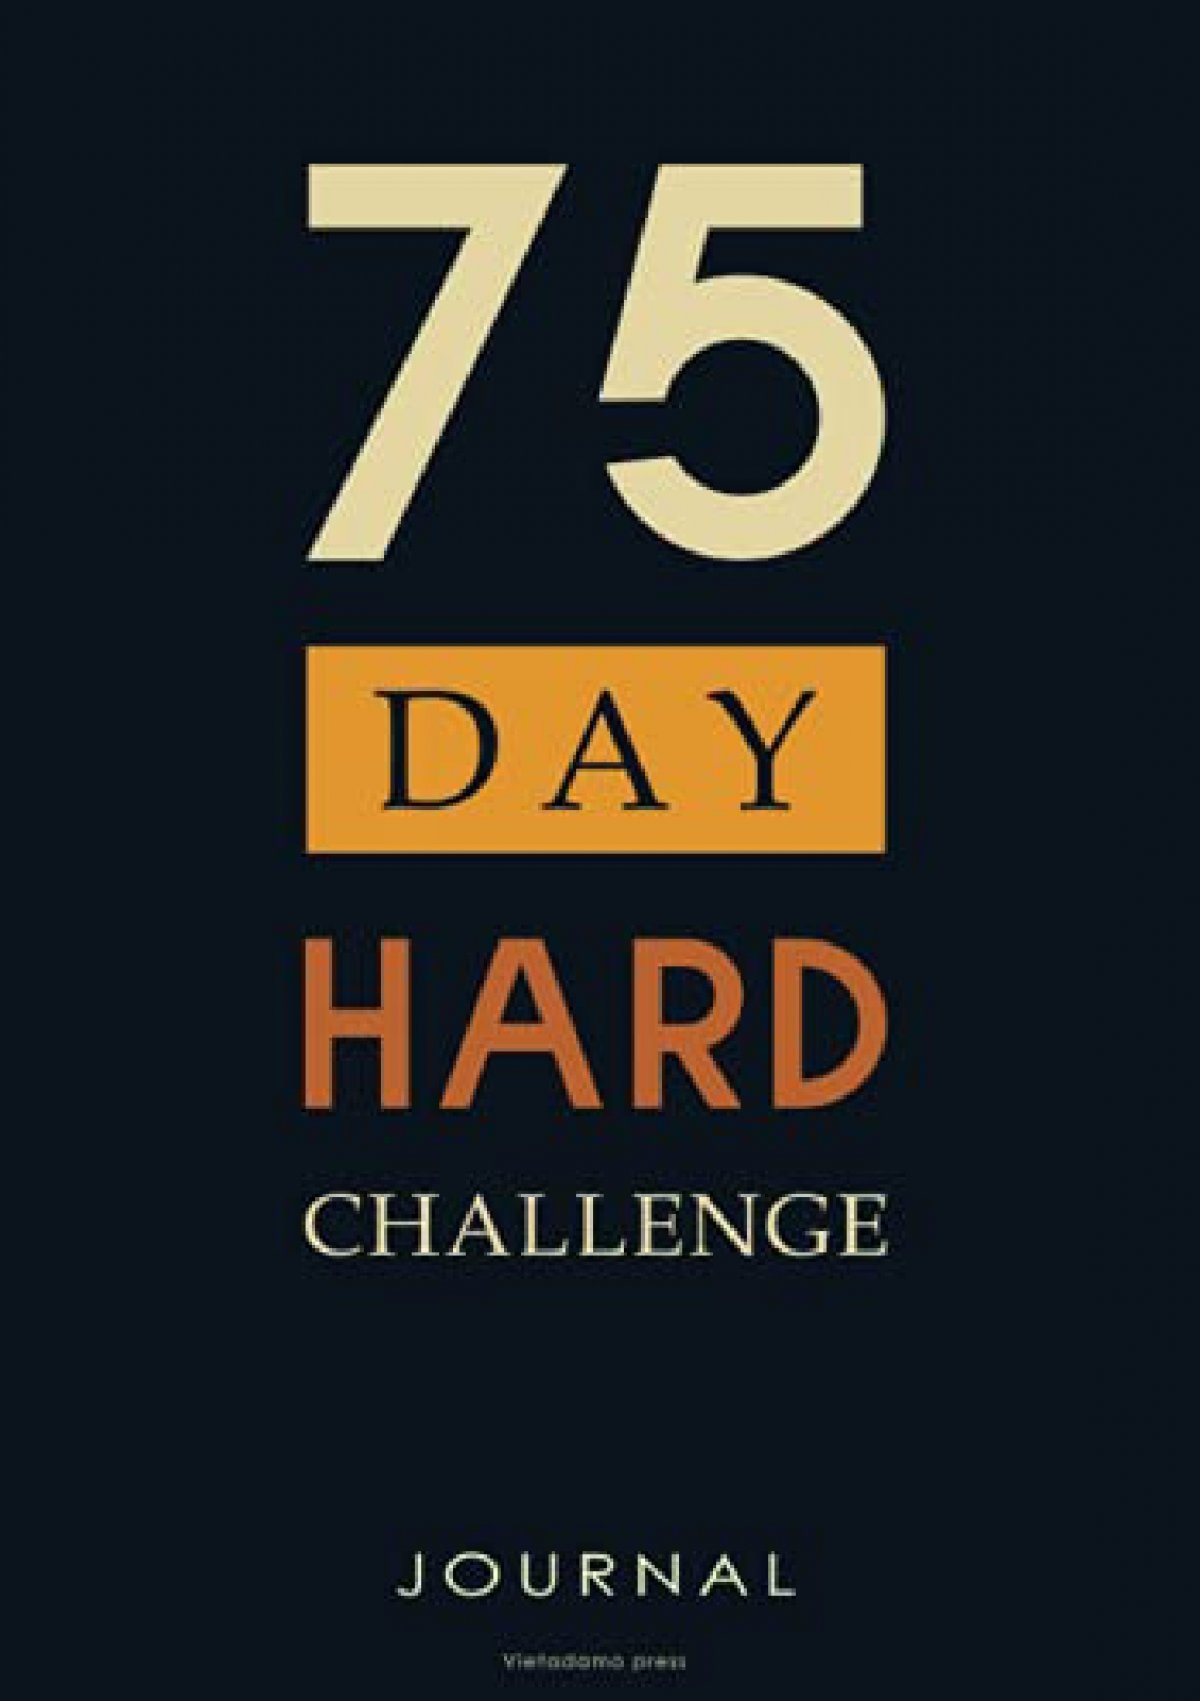  Download 75 Day Hard Challenge Journal Follow A Diet Do 2 Workouts No Alcohol Or Cheat 